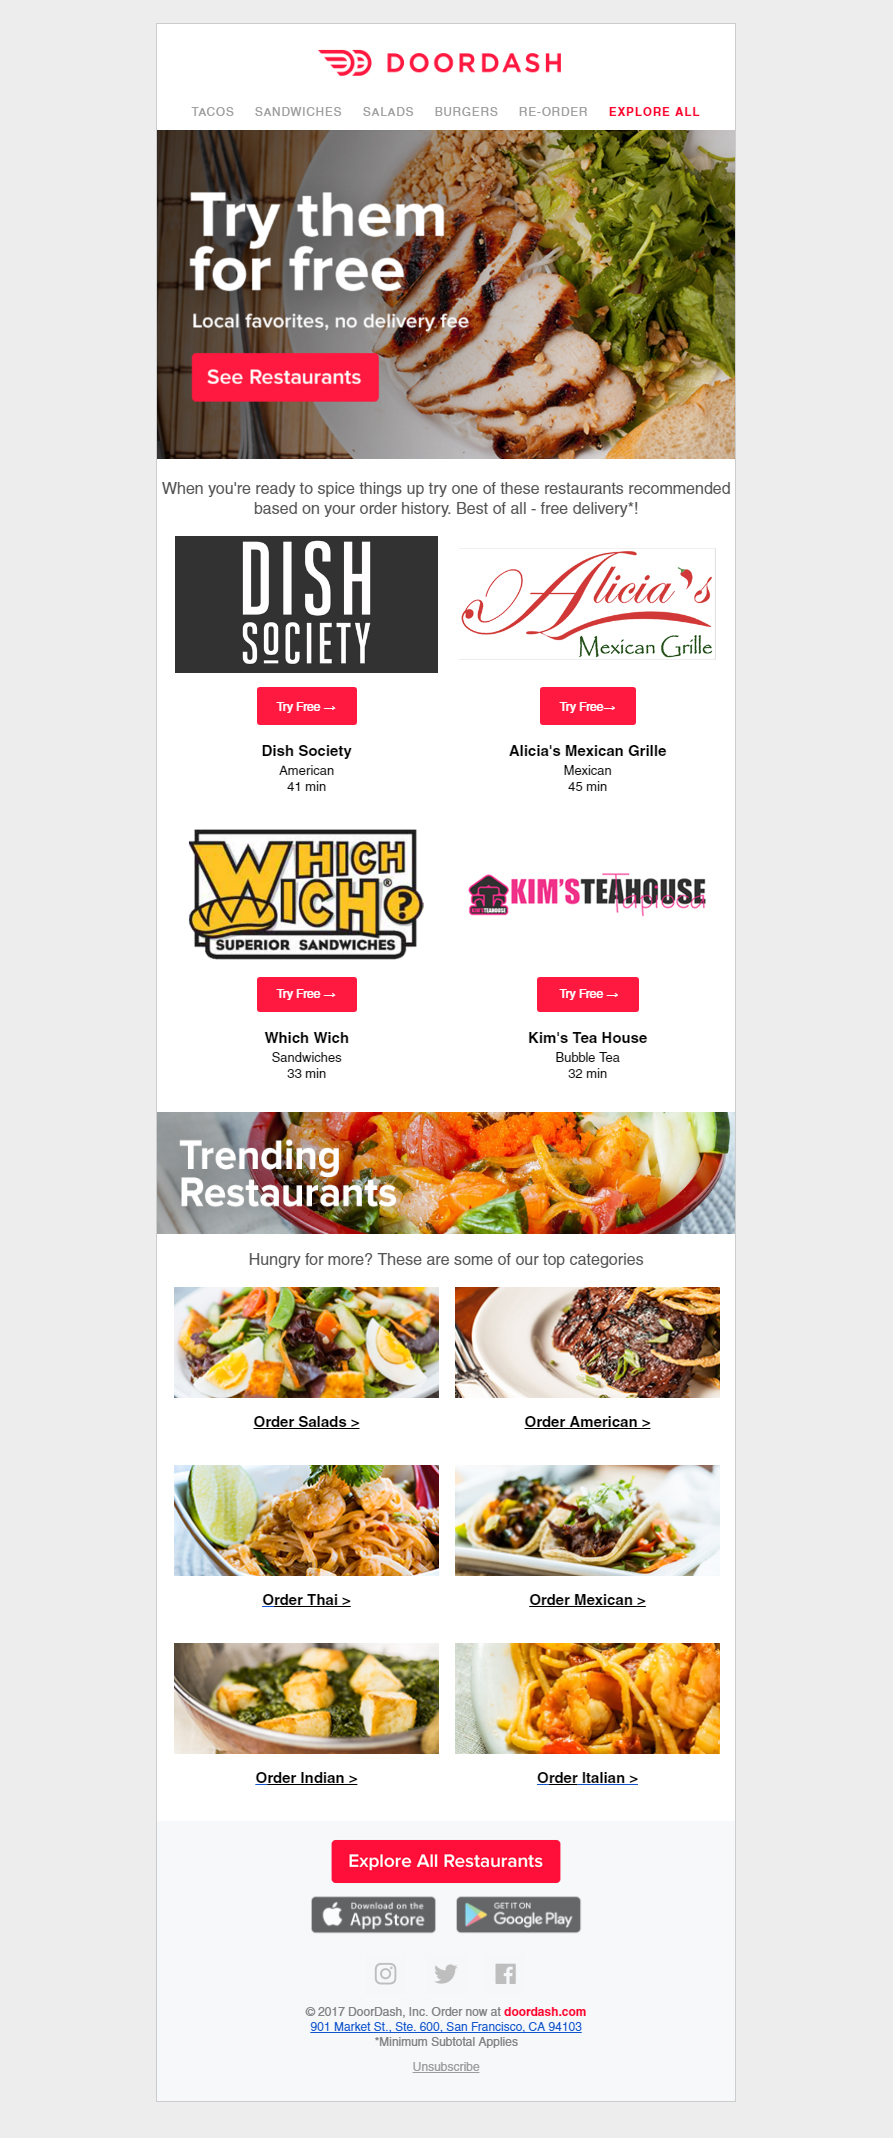 DoorDash's email marketing campaign has me drooling at your desk. Learn how you can get customers engaged and invested with email marketing tactics borrowed from the pros.